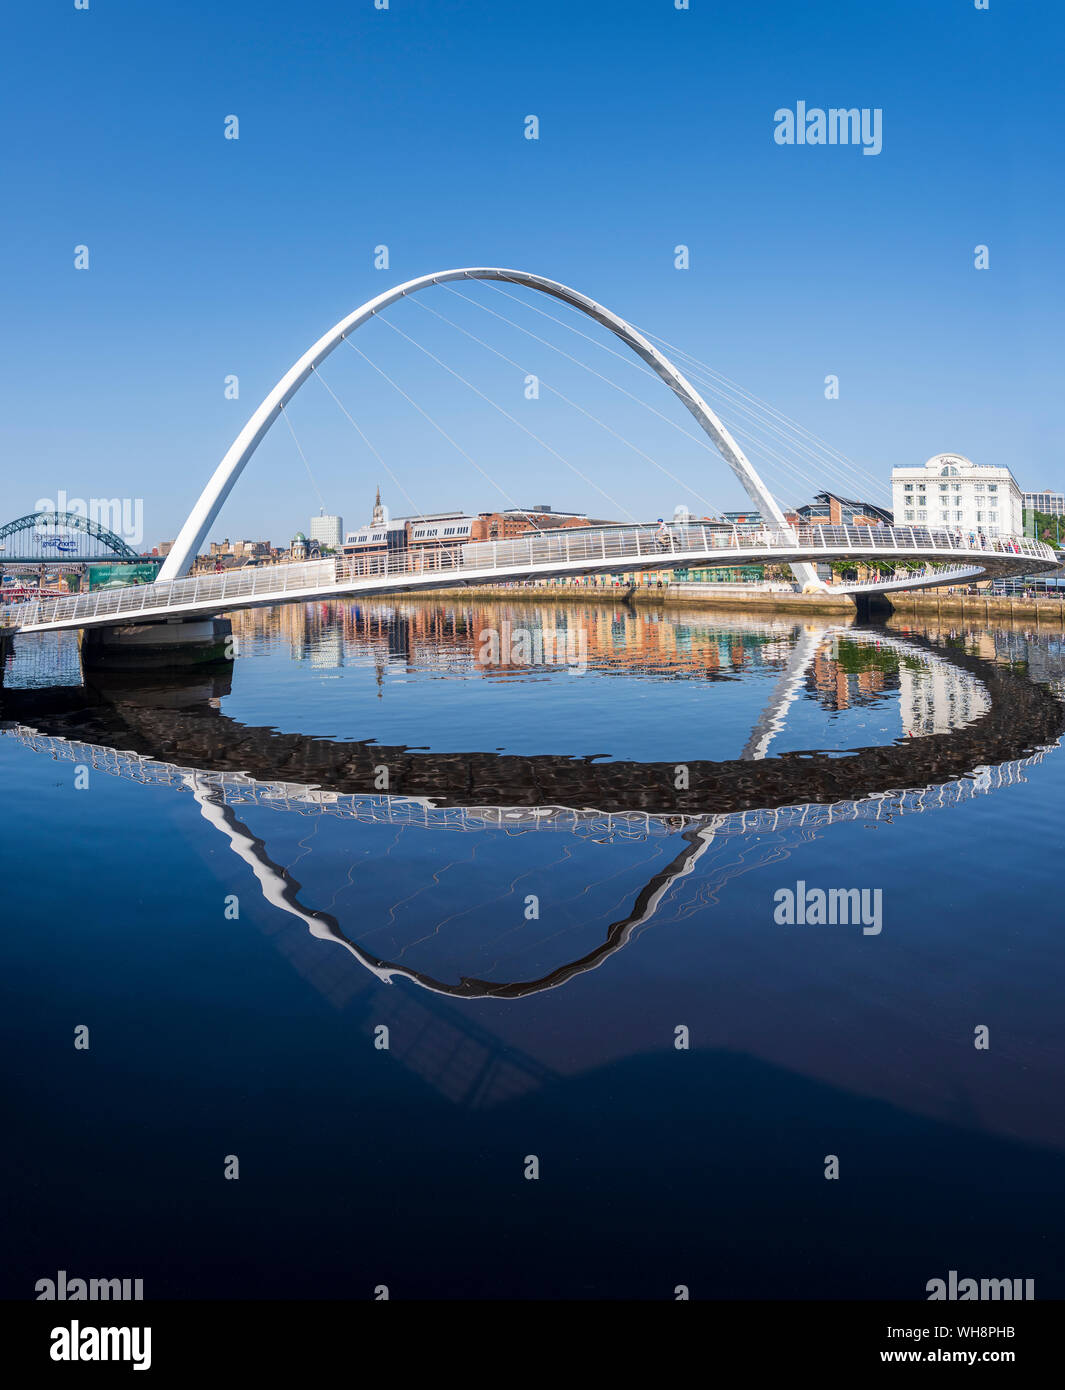 Under a blue sky Newcastle upon Tyne and Millennium Bridge viewed from Gateshead side of river Tyne Stock Photo